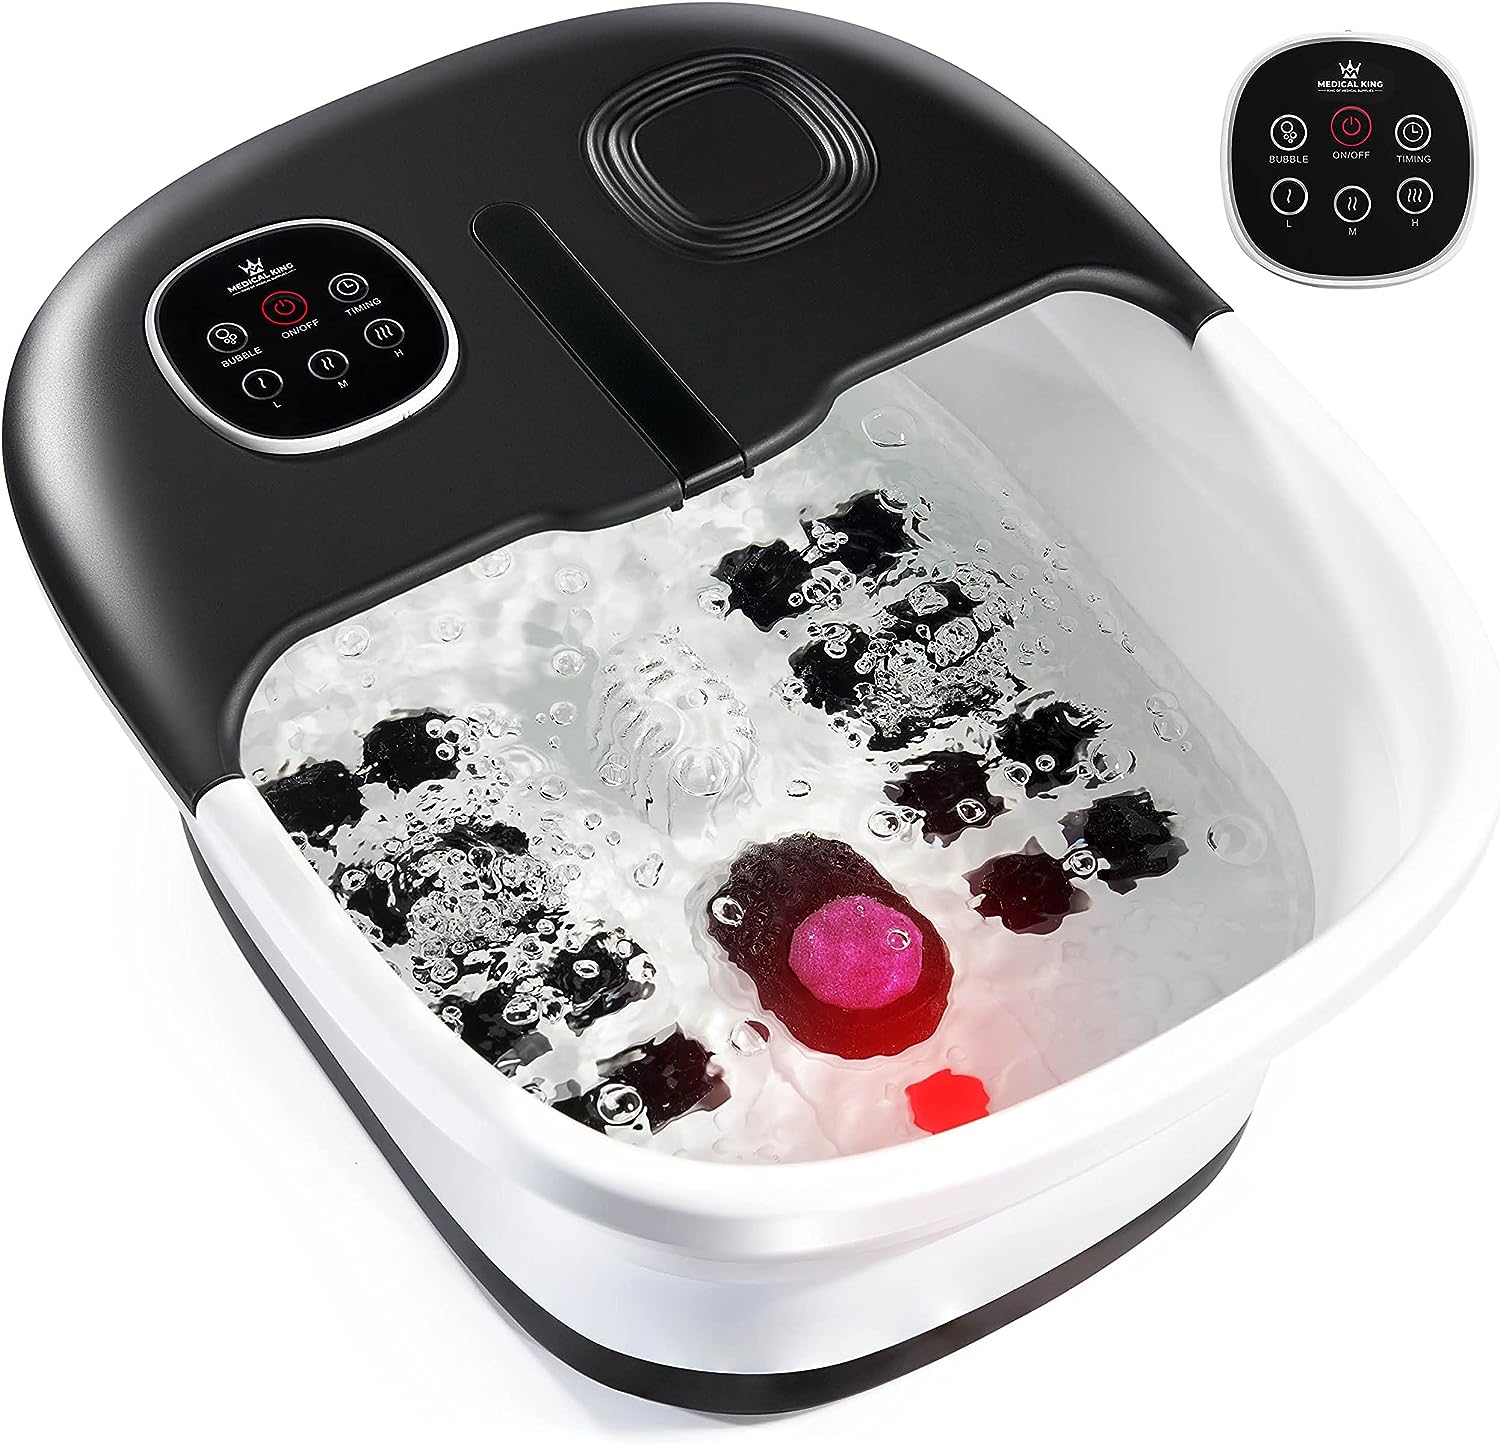 Foot Spa with Massage Bubbles and Heat